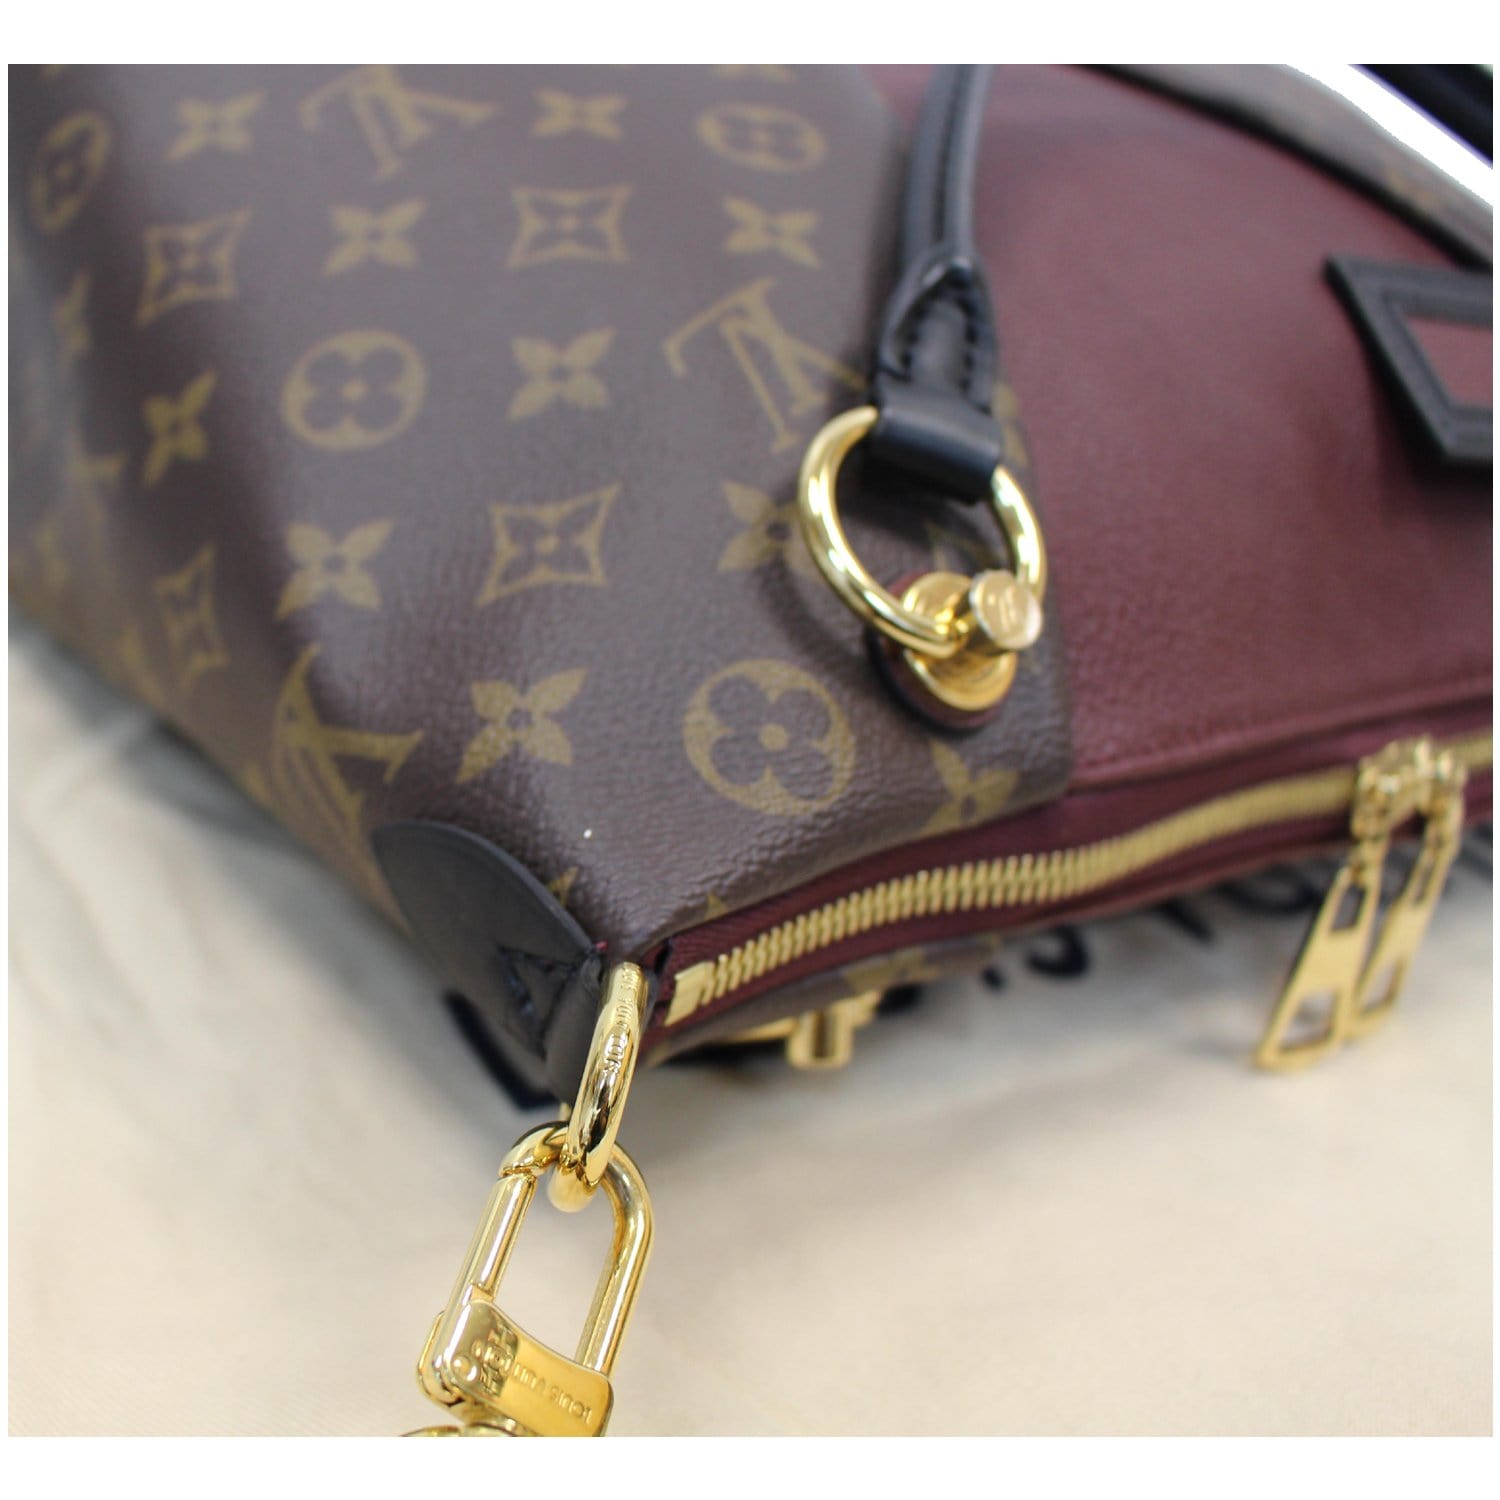 Size comparison delightful vs graceful vs totally vs Neverfull !, By Memes  Treasures Sales and Authentication Service